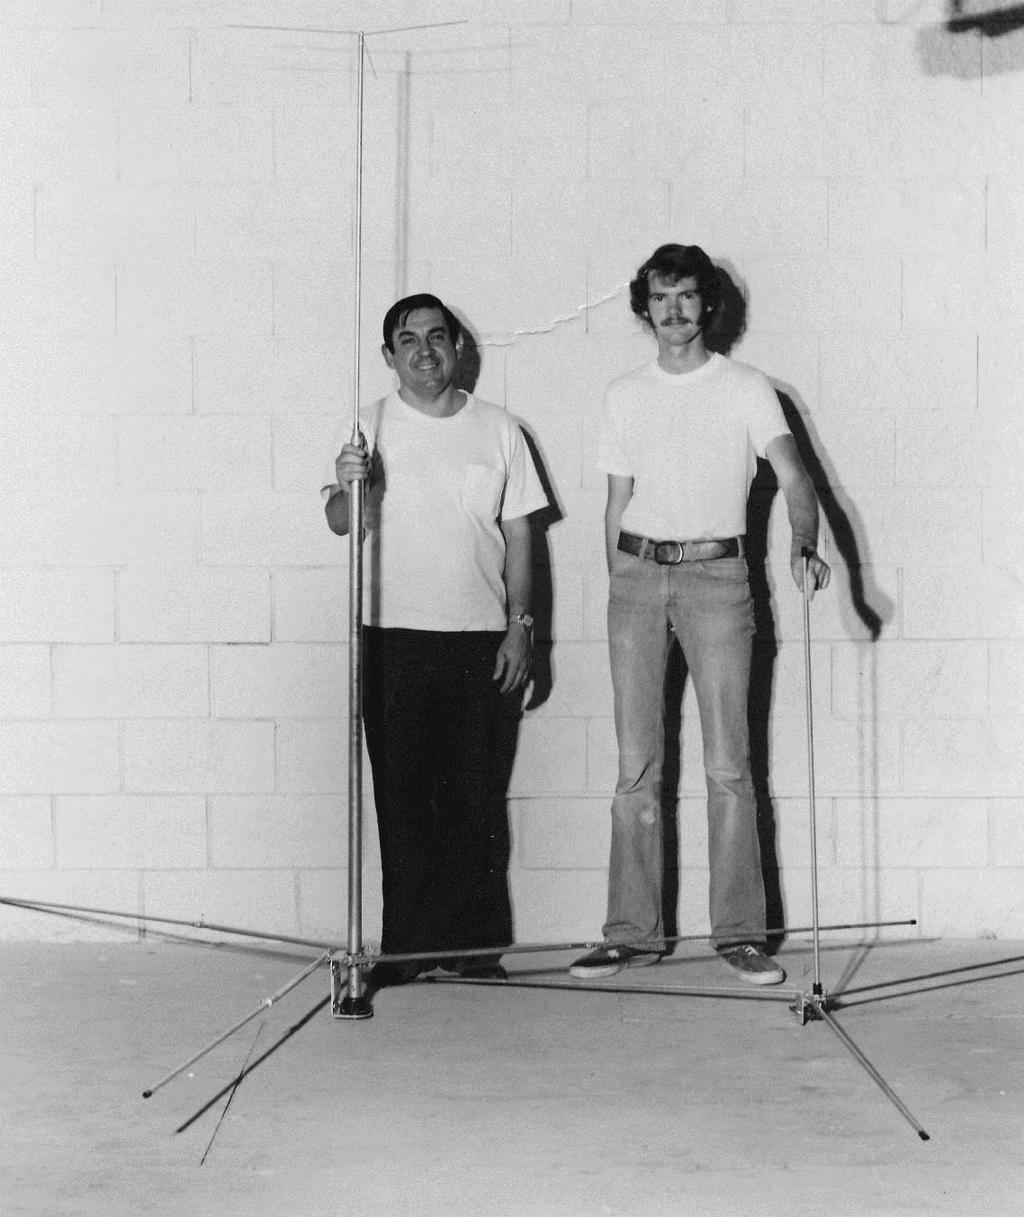 The 53 MHz up link and 72 MHz Down link Antennas Both up link and down link antennas are shown with David Hauler (right) and designer Roland Boucher (left).